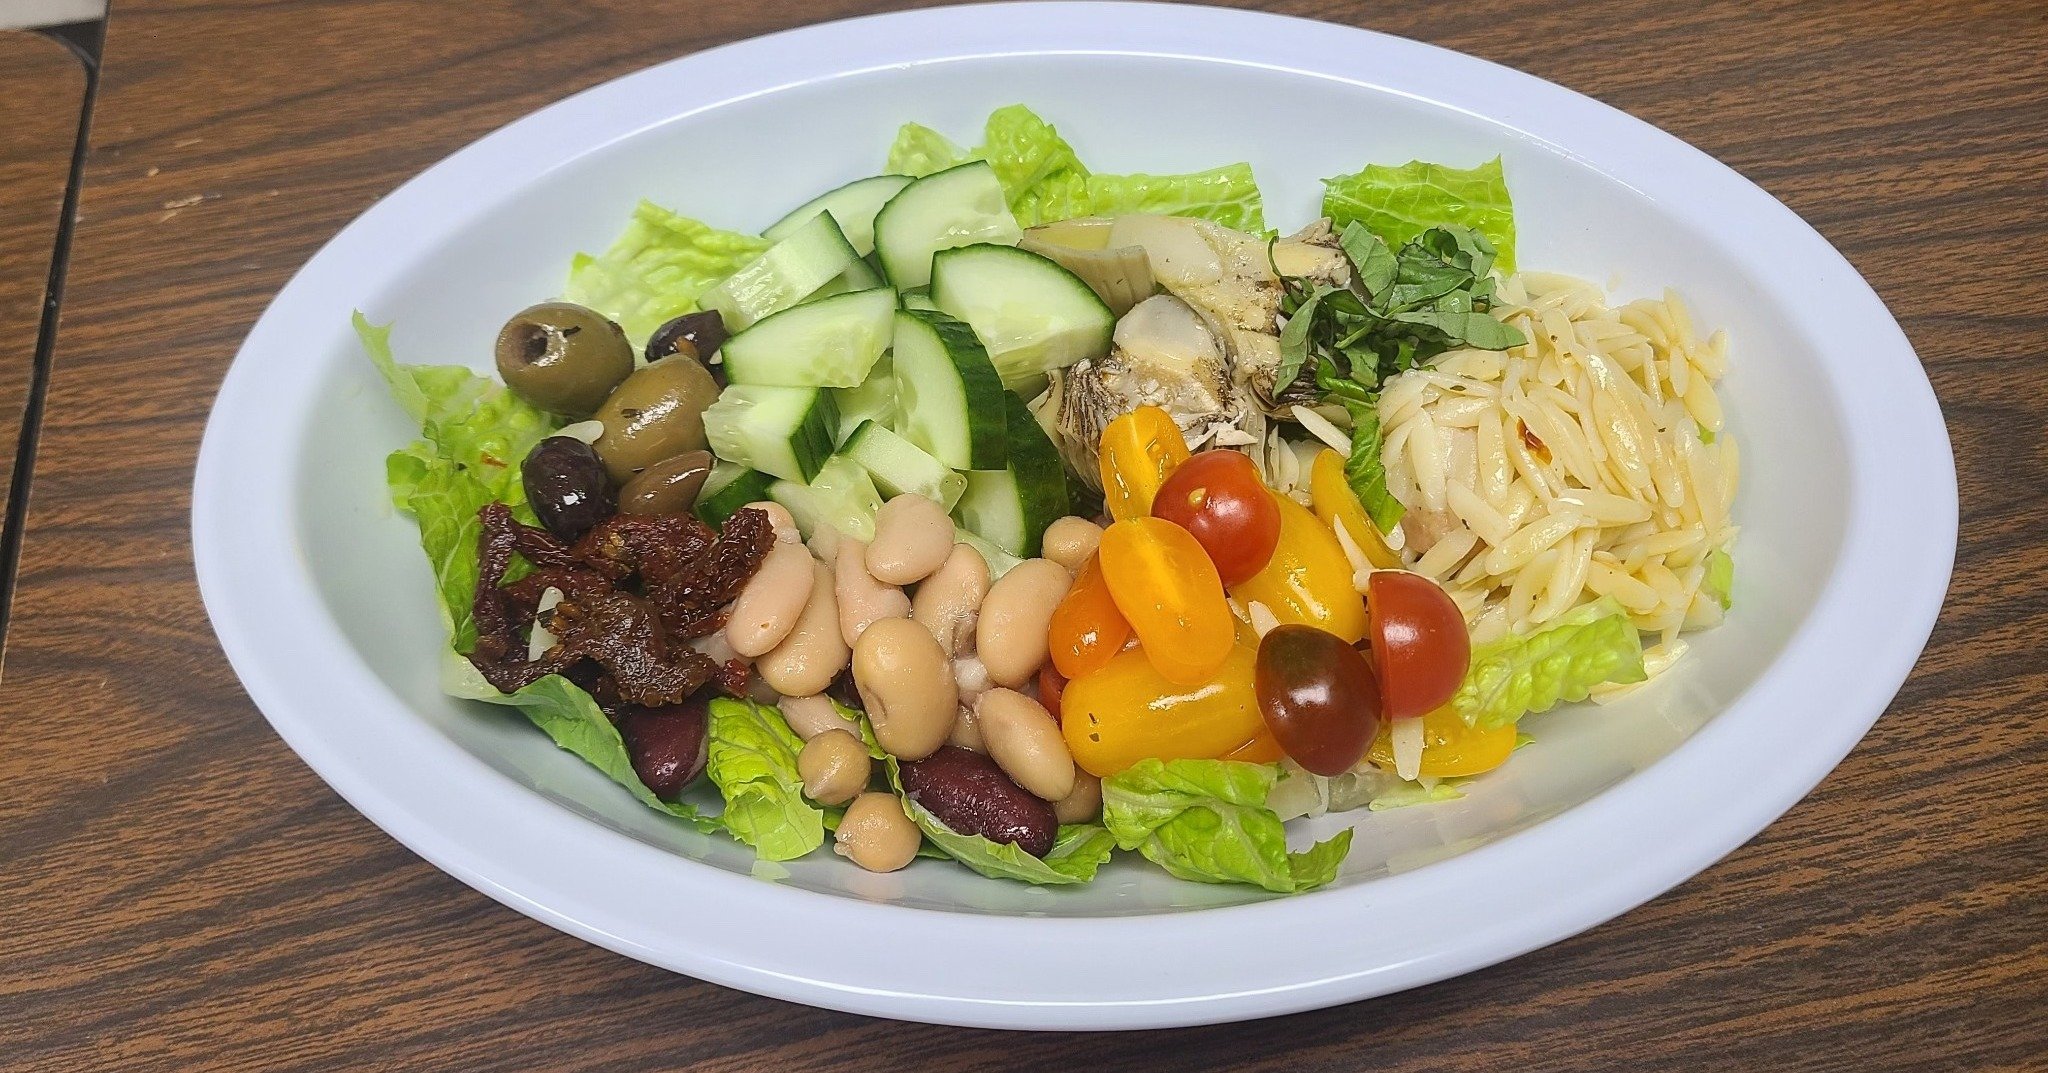 this week&rsquo;s food specials are so fresh &amp; yummy!! stop in to try one&hellip; or all! 😏🤷🏼&zwj;♀️

⭐️ mediterranean bowl: orzo - cucumbers - beans - sun dried tomatoes - olives - artichokes - romaine - red wine vinaigrette - side of tzatzik